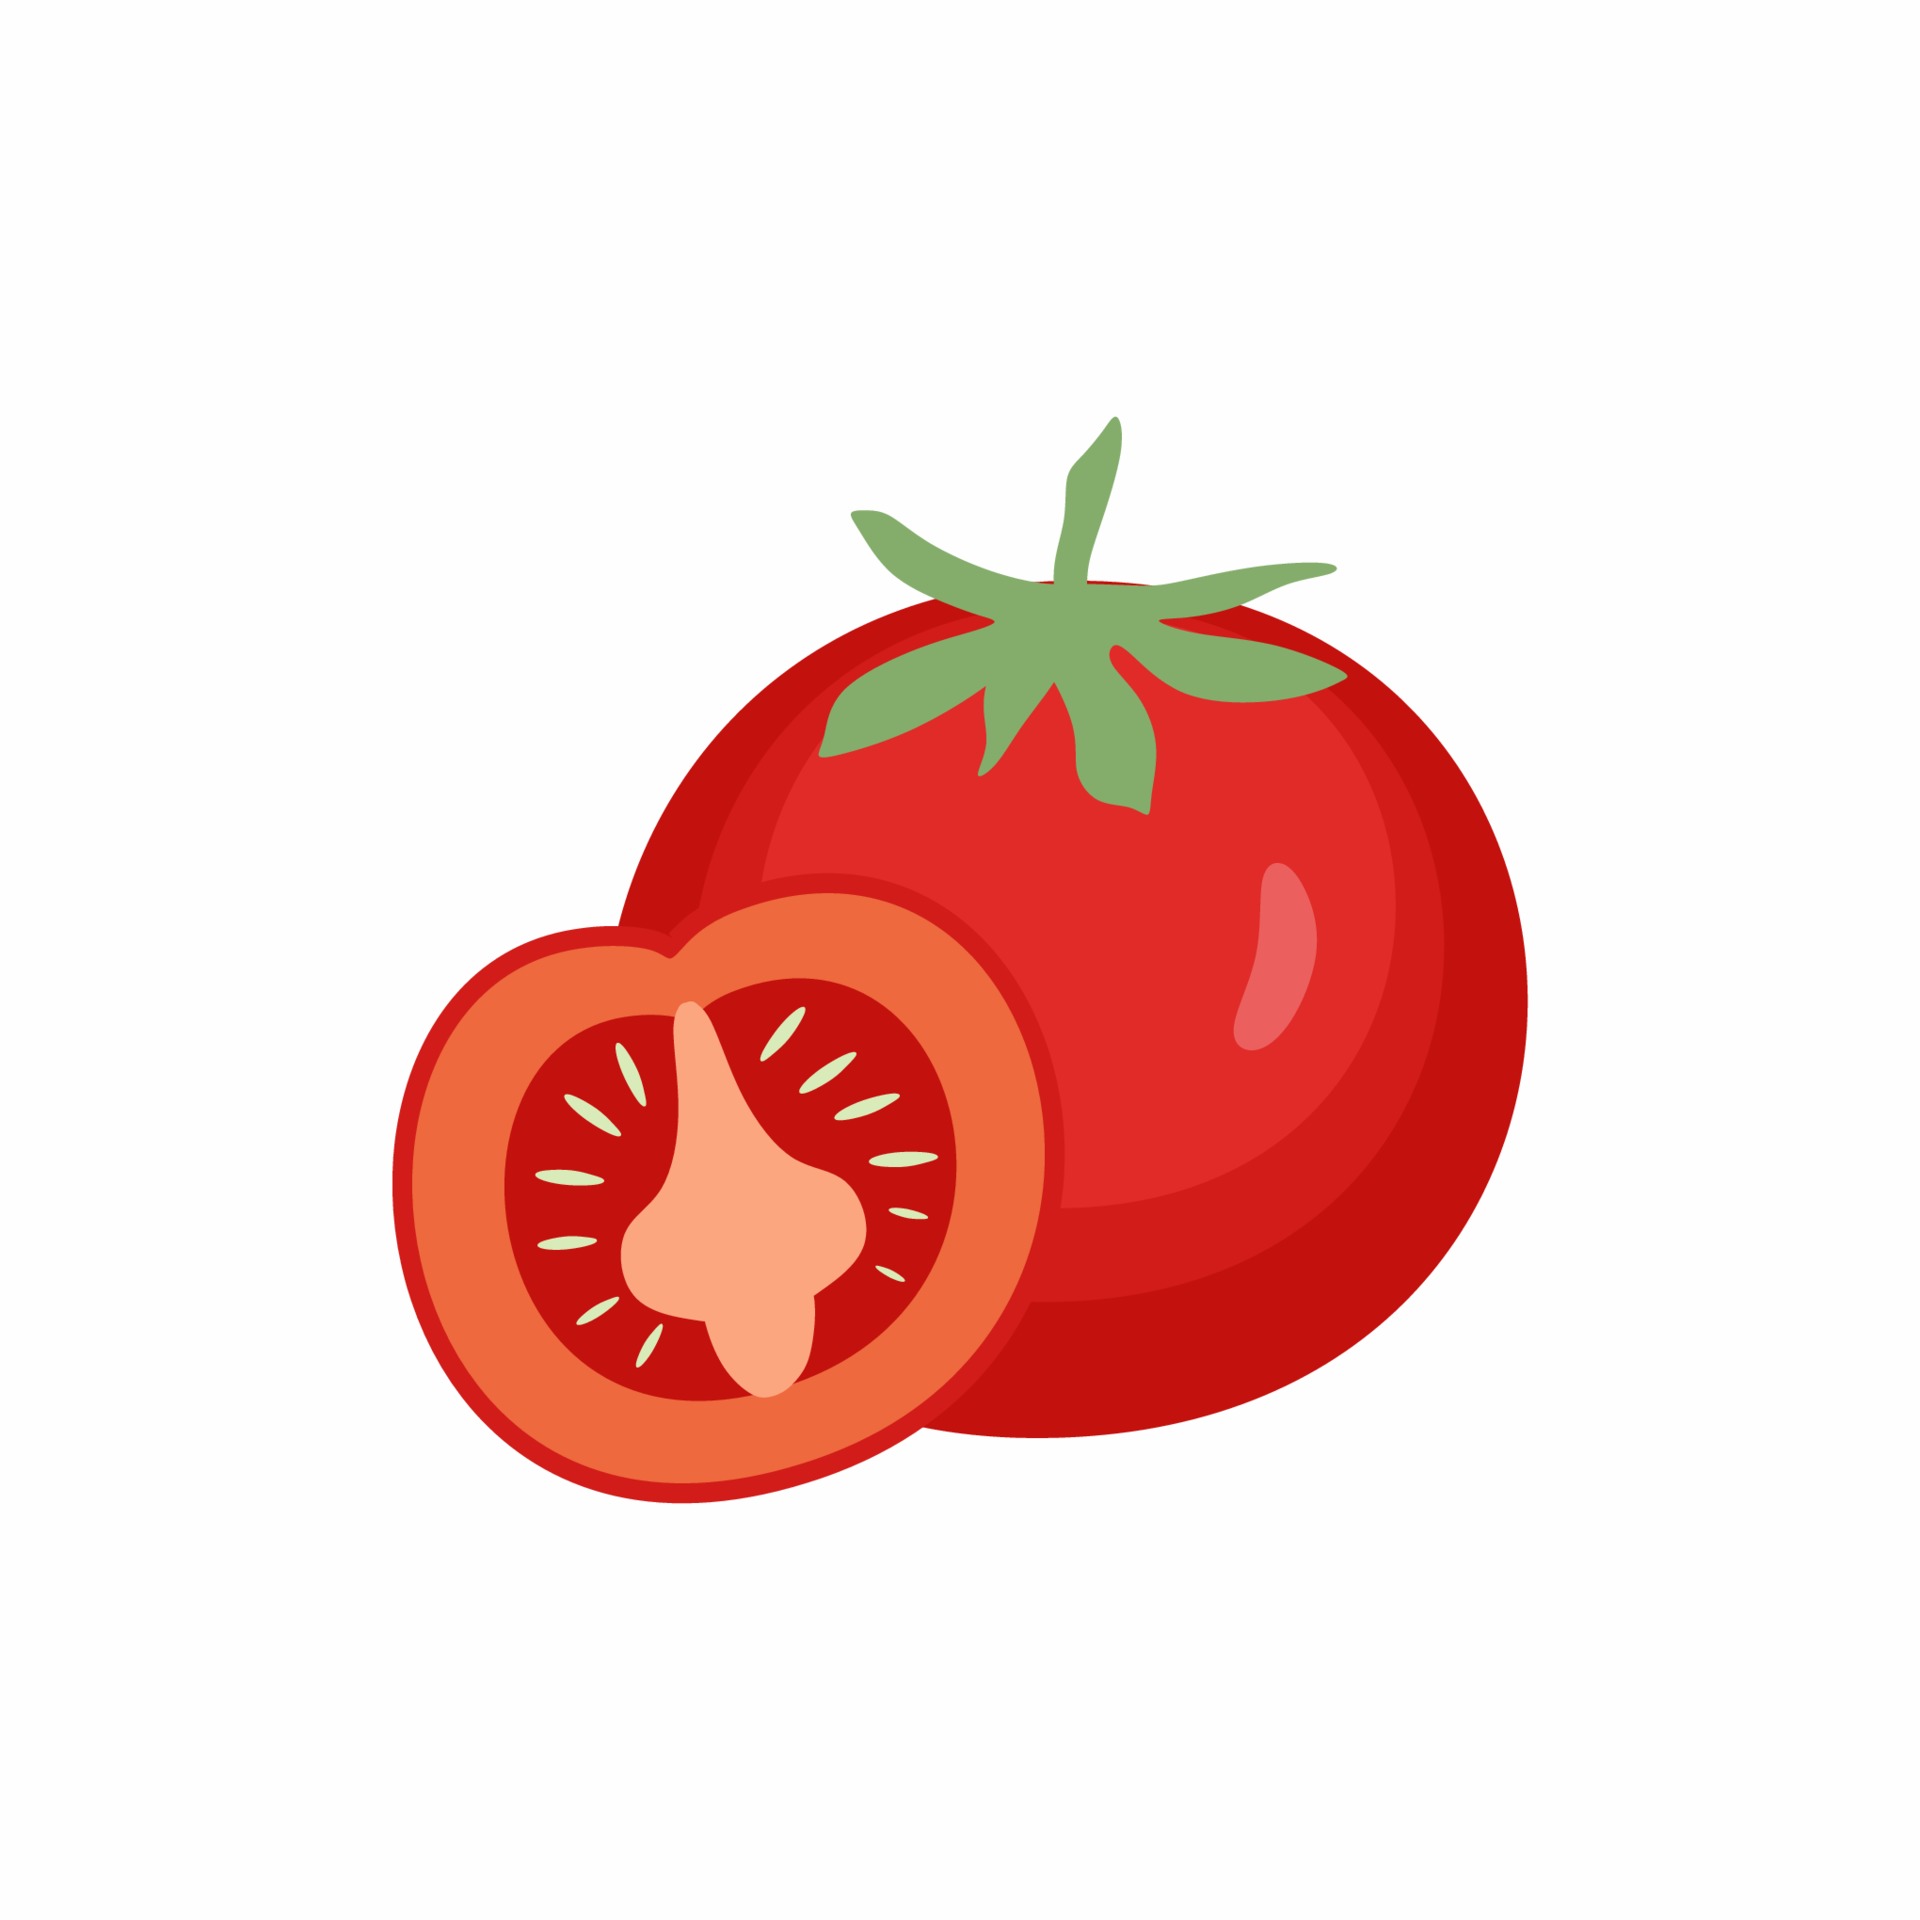 Tomato Icon In Flat Style Red Tomatoes With Green Leaves Food Fruits Vegetable From The Farm Organic Food Concept Vector Design Coloring Tomattoes Cartoon Illustration 987 Vector Art At Vecteezy